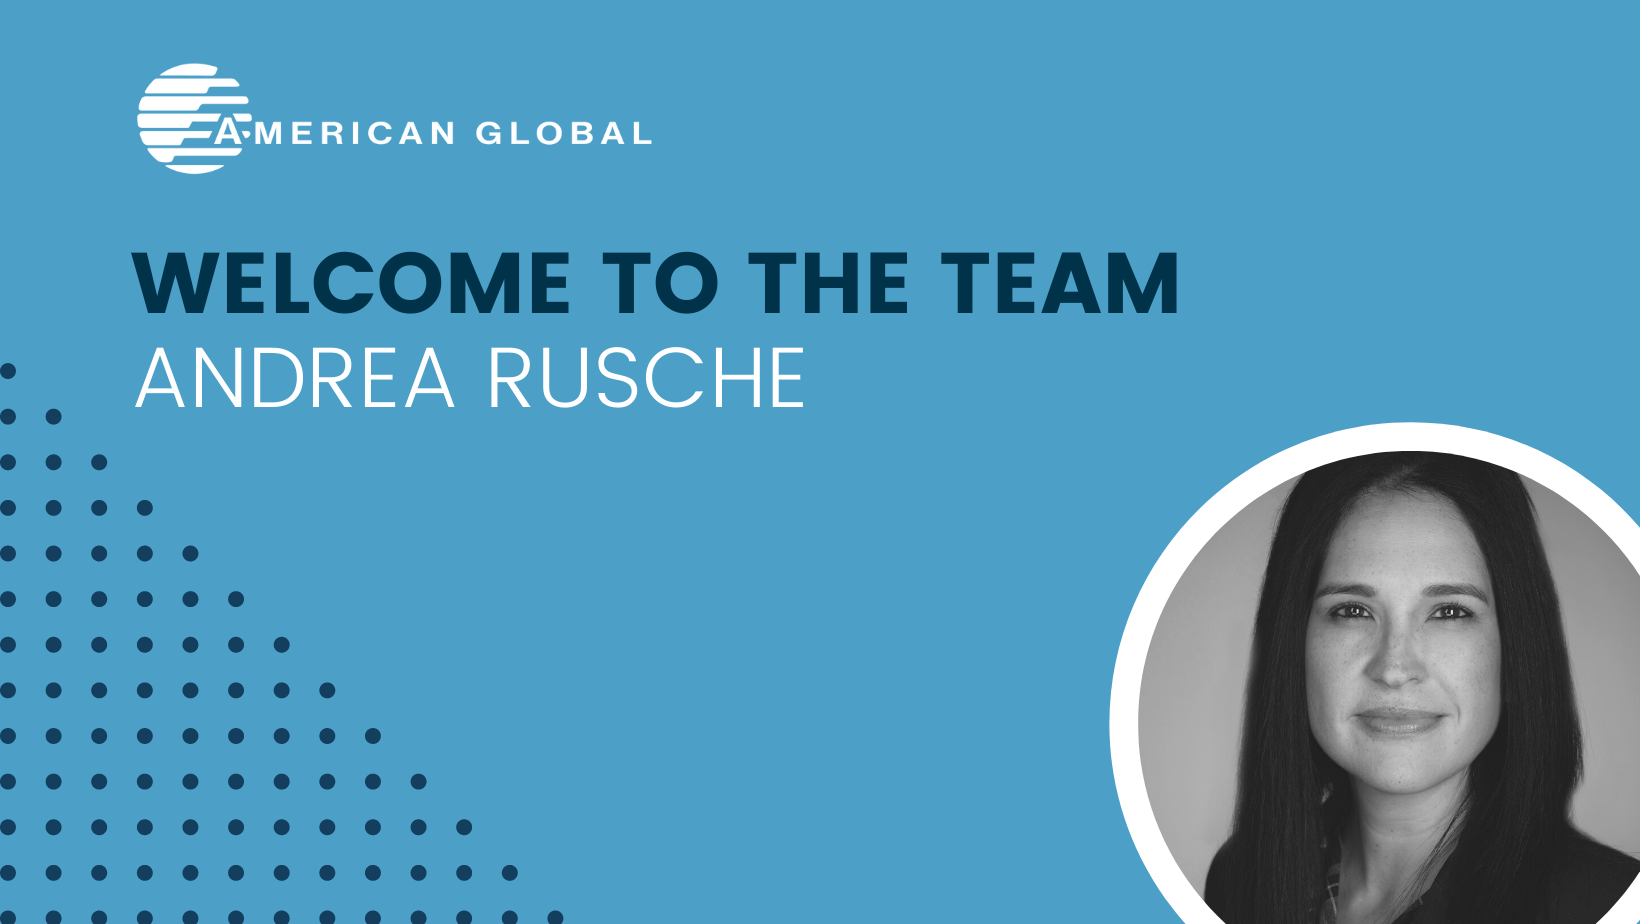 welcome to the team message with Andrea Rusche’s image